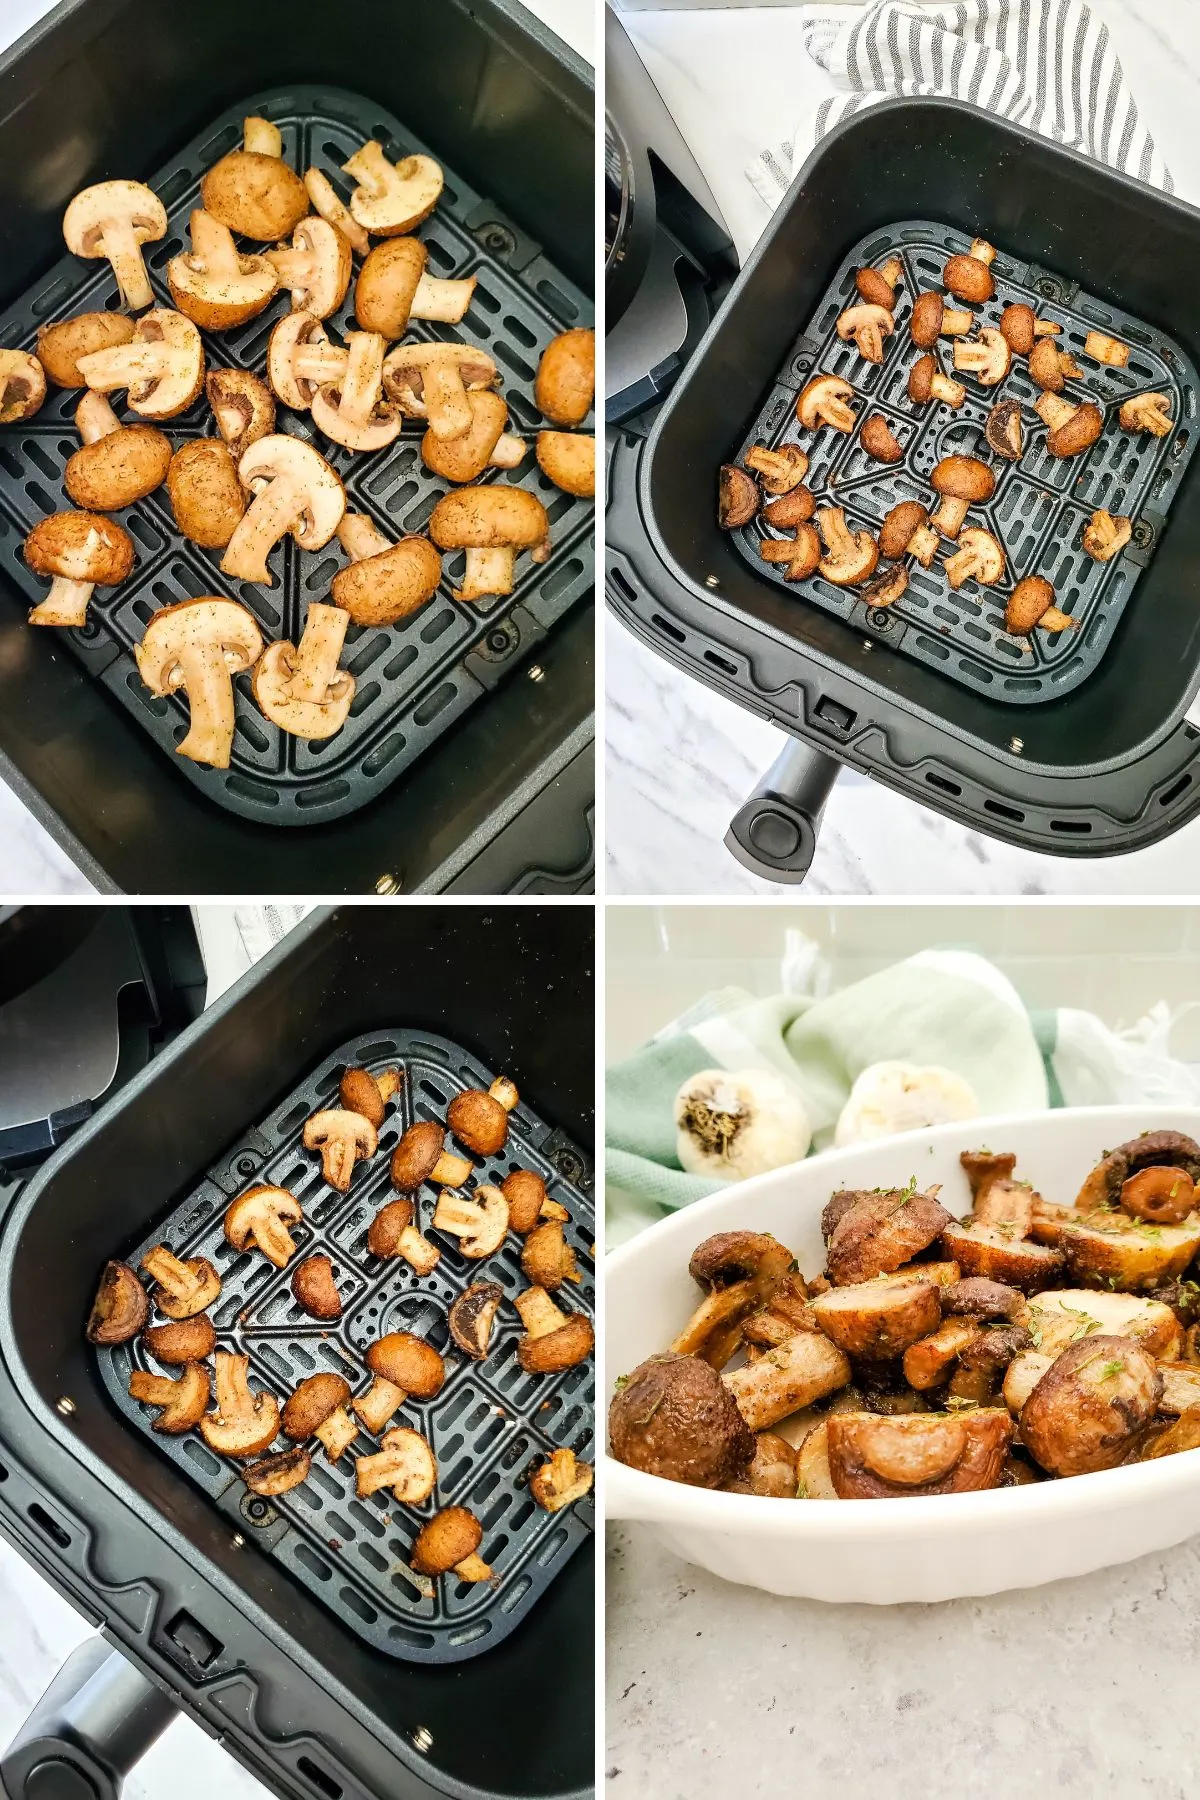 The last four images in collage on how to make Air Fryer Mushrooms.